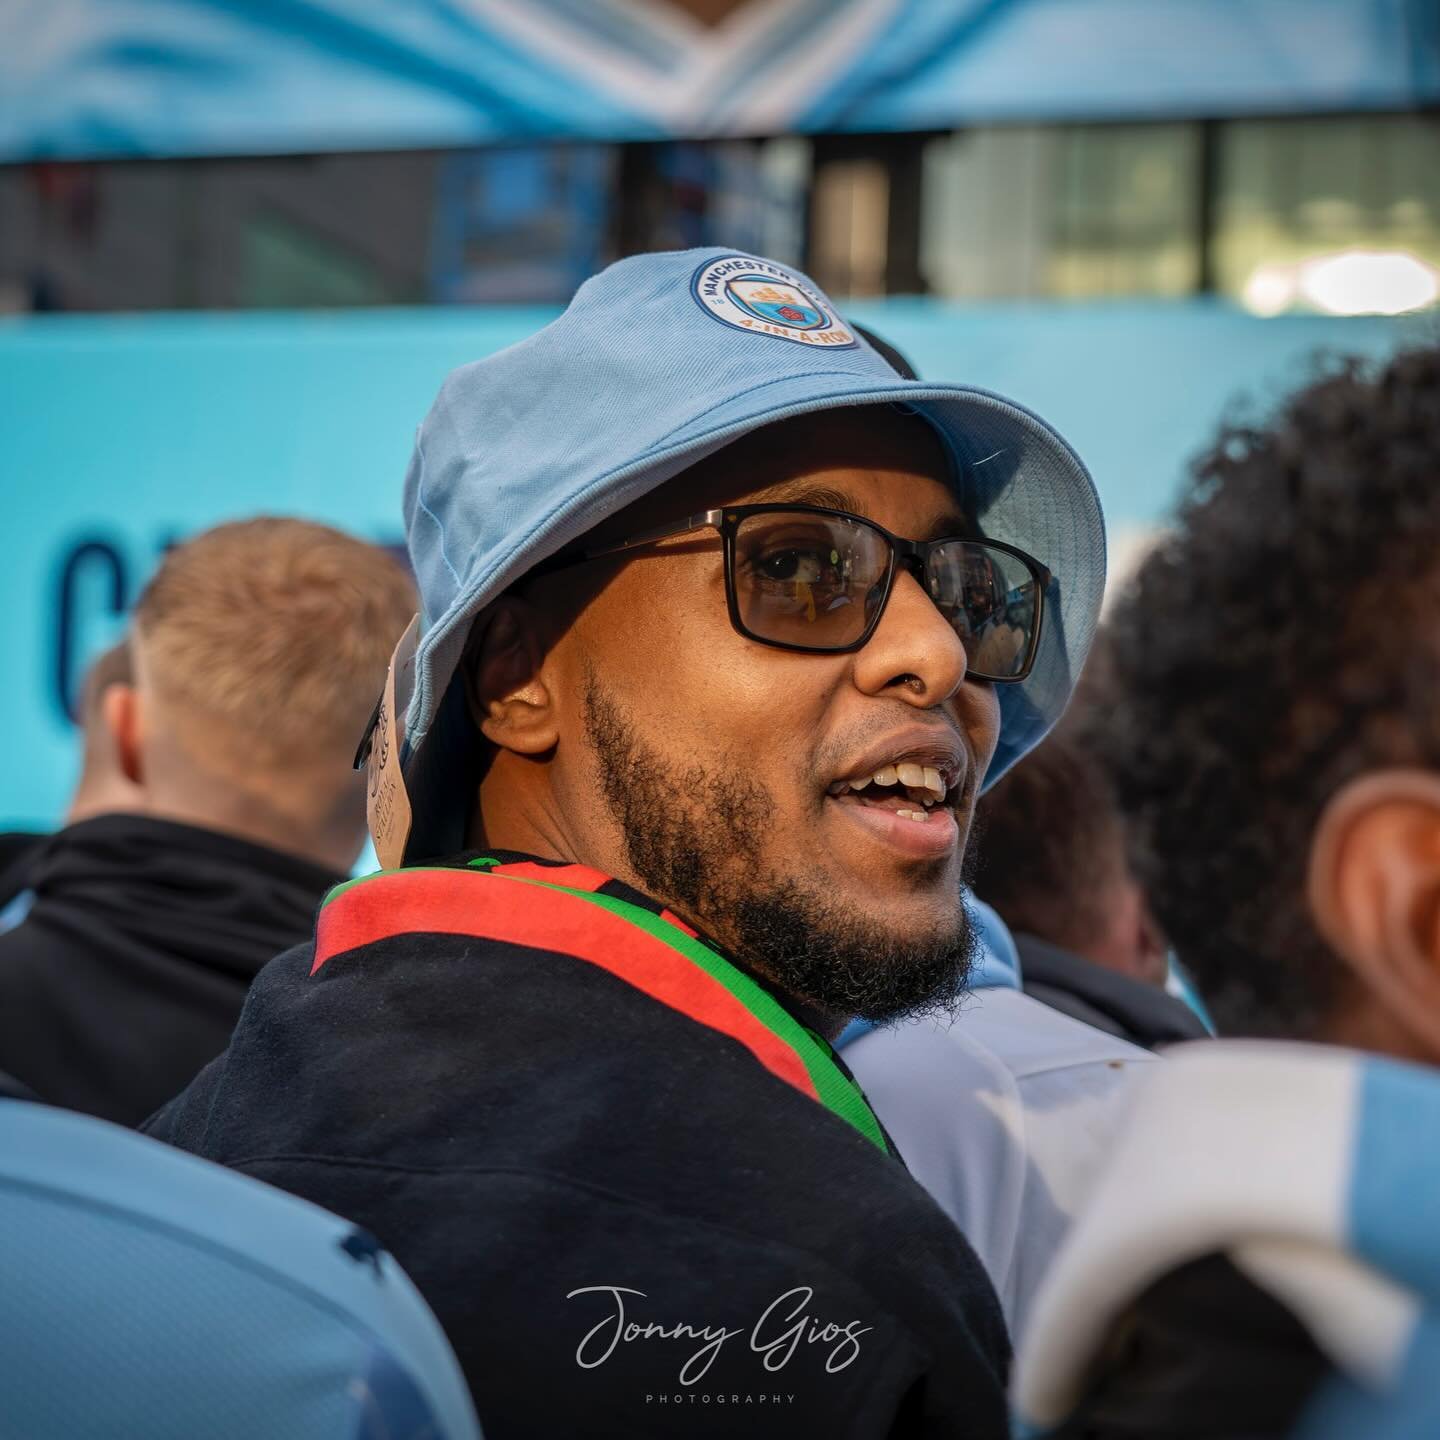 CITY PARADE - fans and the players! 2/3

What a great night celebration #4inarow for @mancity great to be right in the thick of it at the front of the parade last night 

#manchestercity #mancityparade #premierleaguechampions #manchester #bluemanches